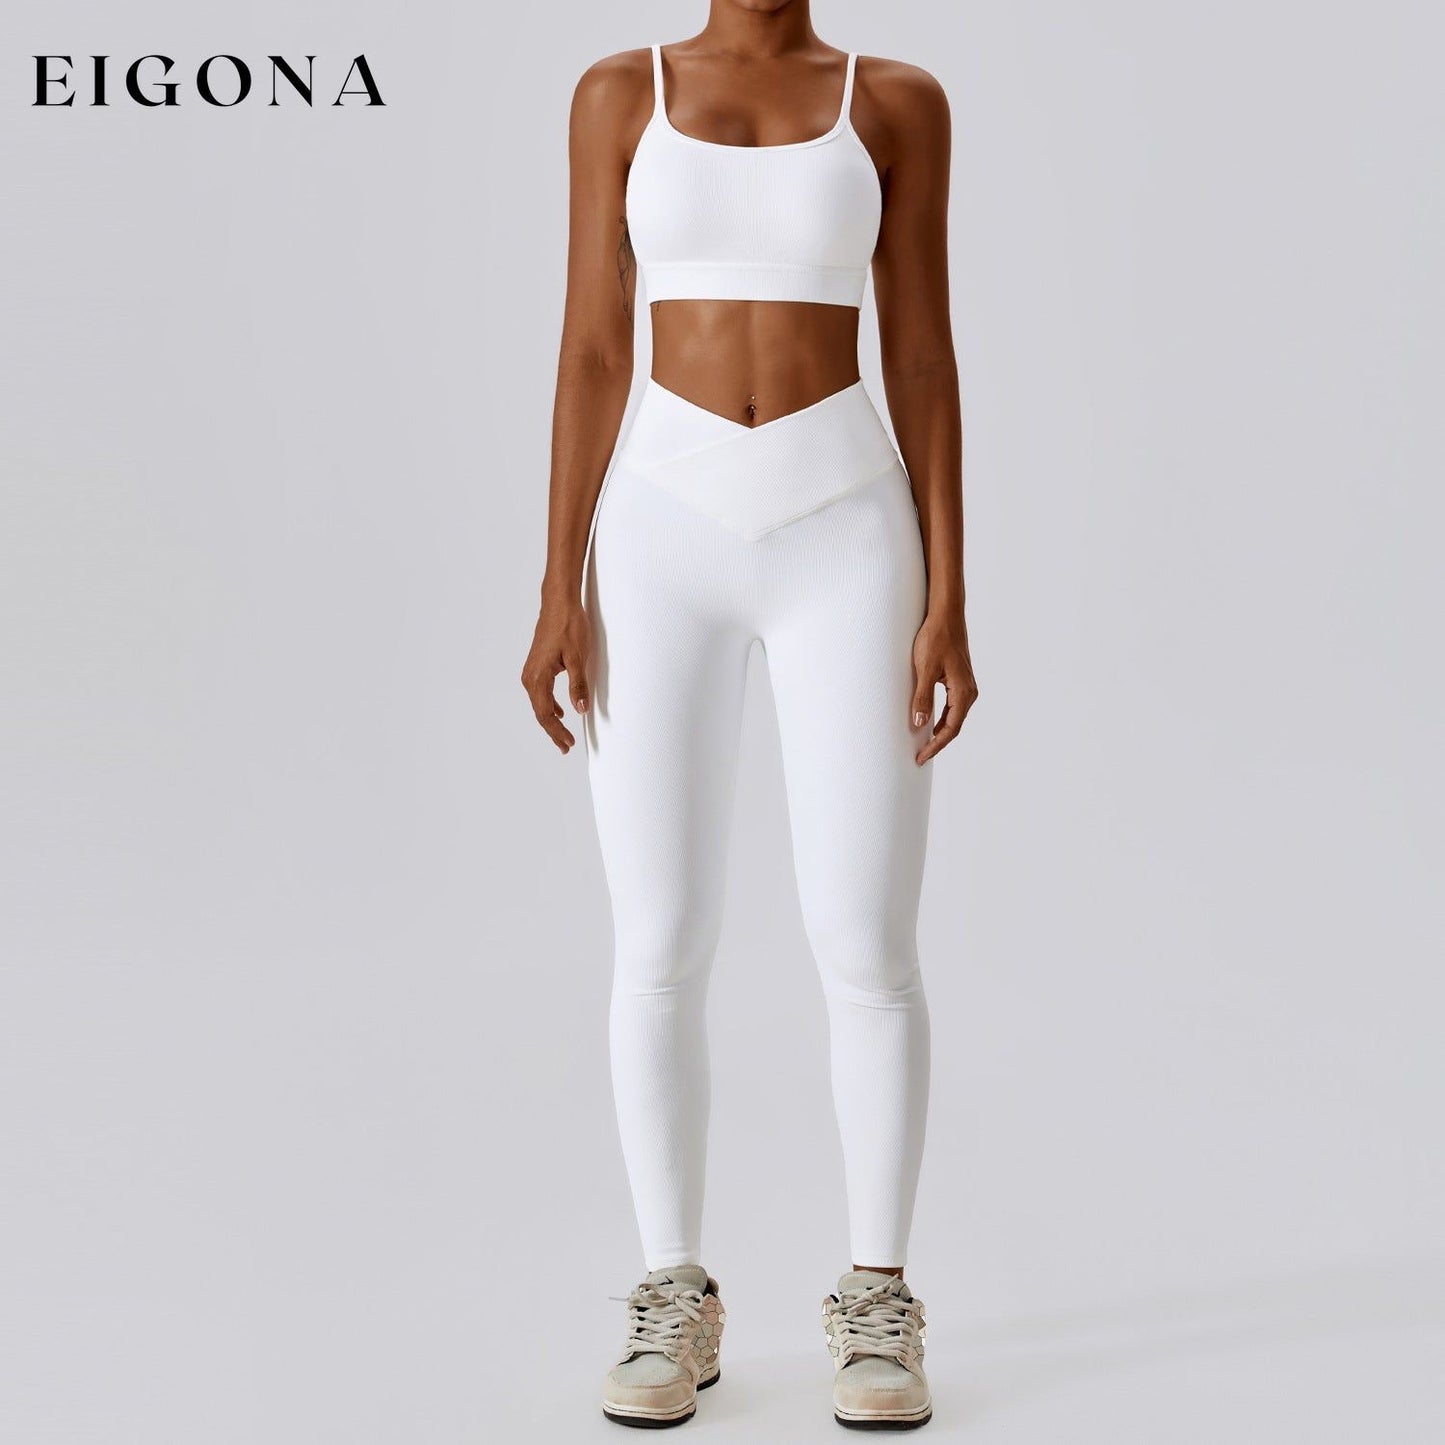 Thread Abdominal Shaping High Waist Beauty Back Yoga Suit Quick Drying Push up Hip Raise Skinny Workout Exercise Outfit -1 Bra Trousers Swan White 2 piece activewear clothes set workout